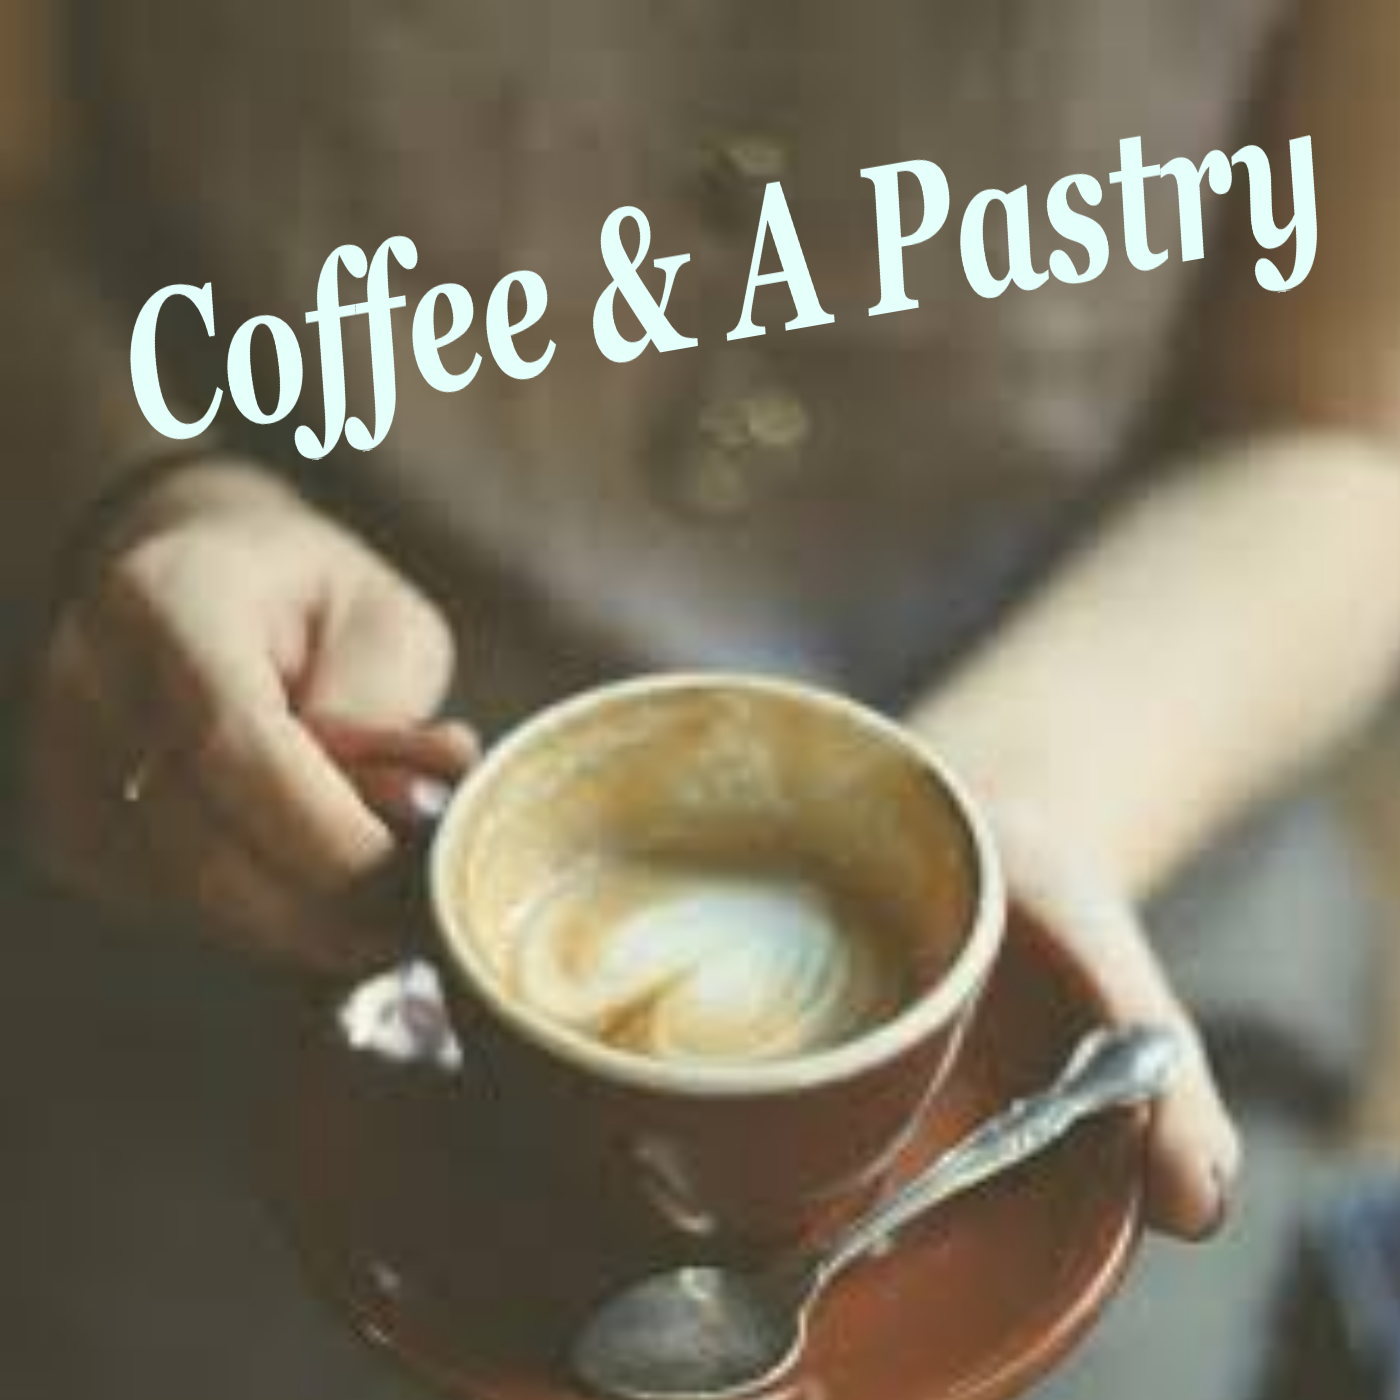 Coffee & A Pastry